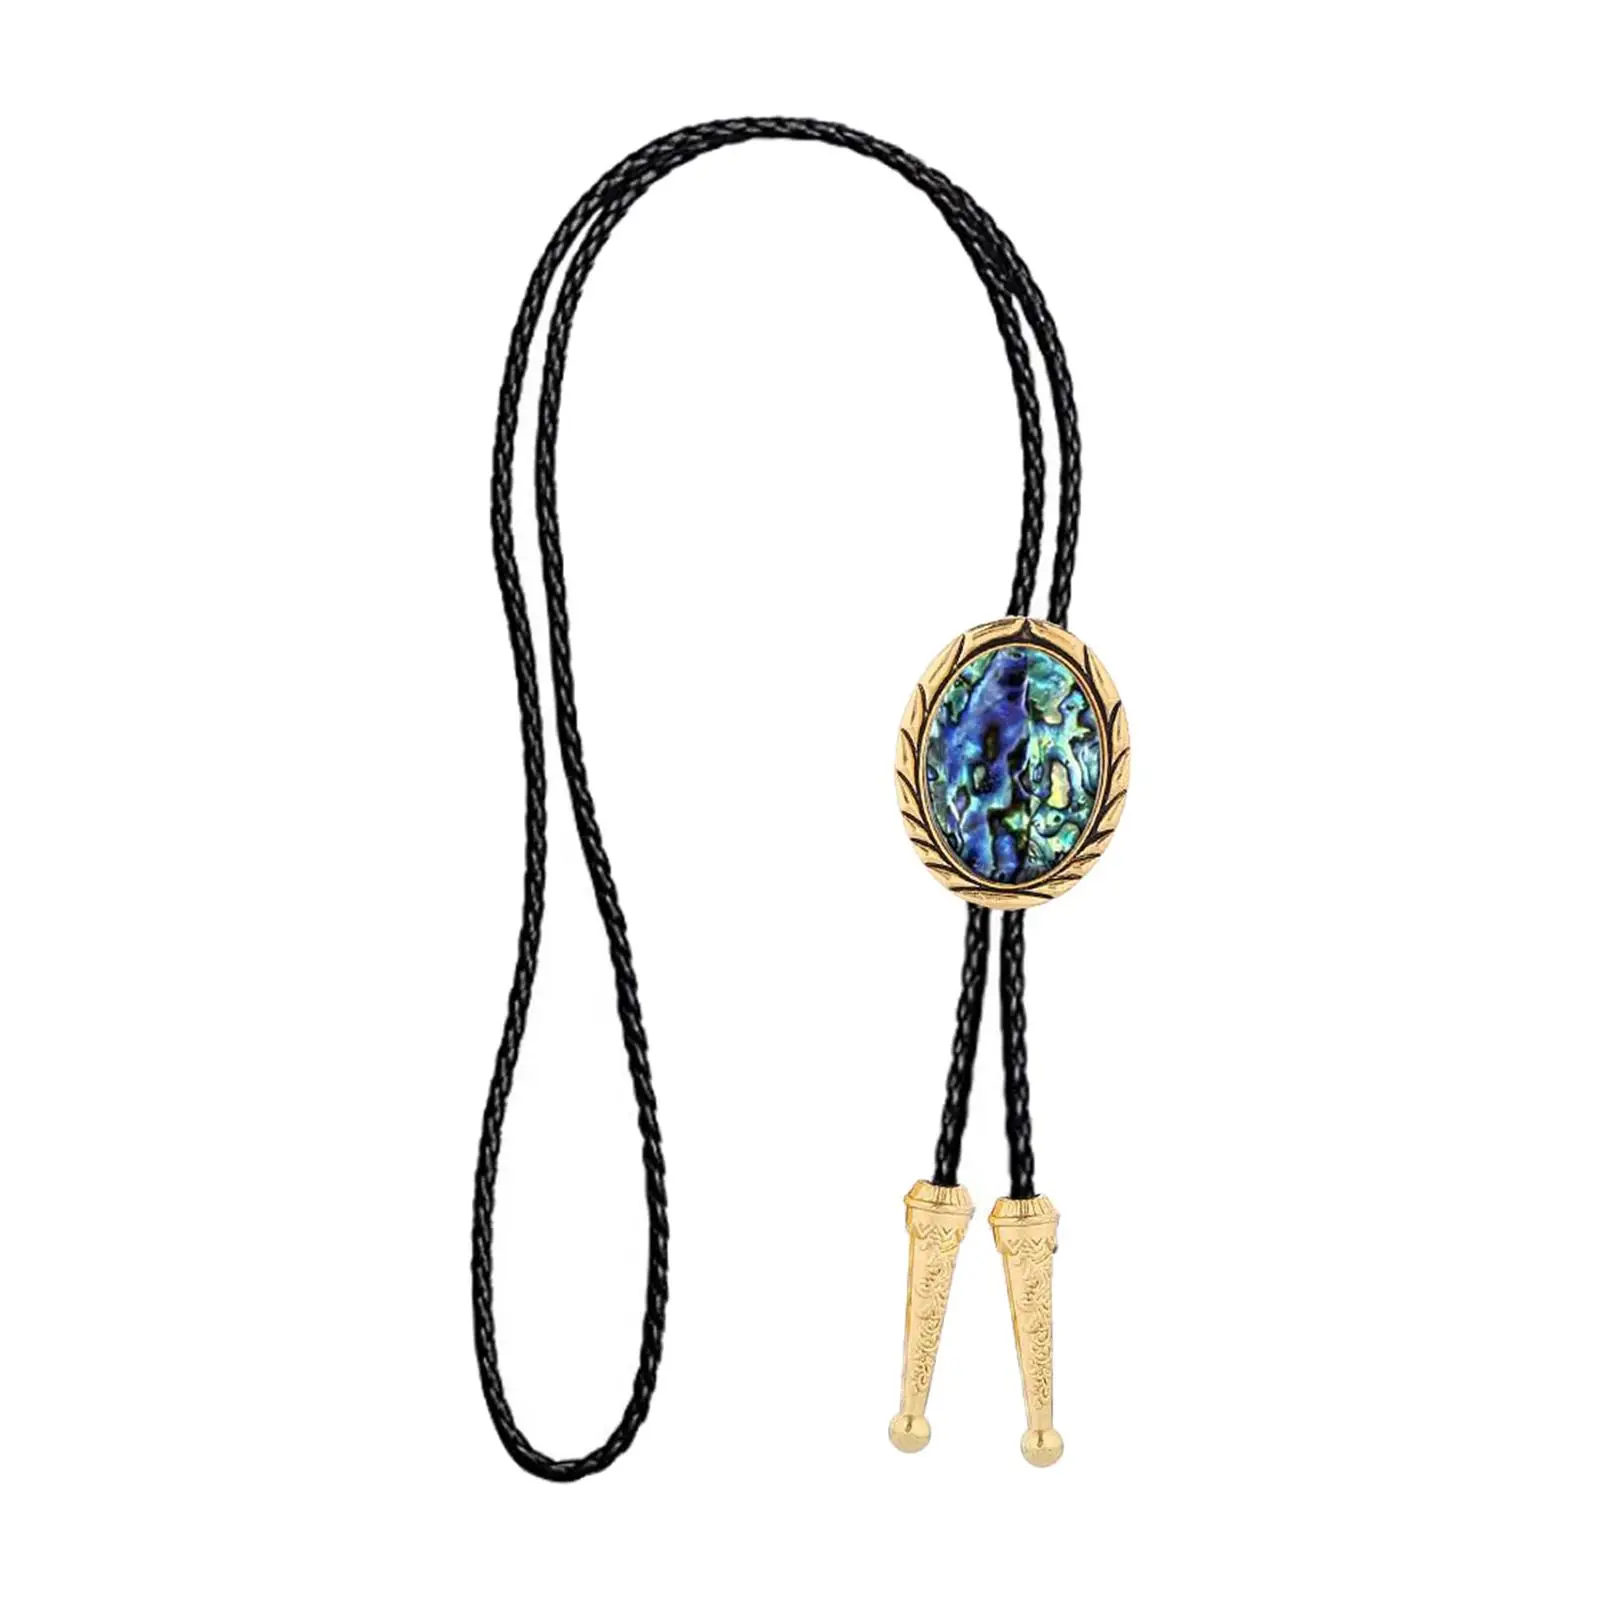 Bolo Tie Oval Pendant Necklace Tie Costume Jewelry PU Leather Rope for Unisex Wedding